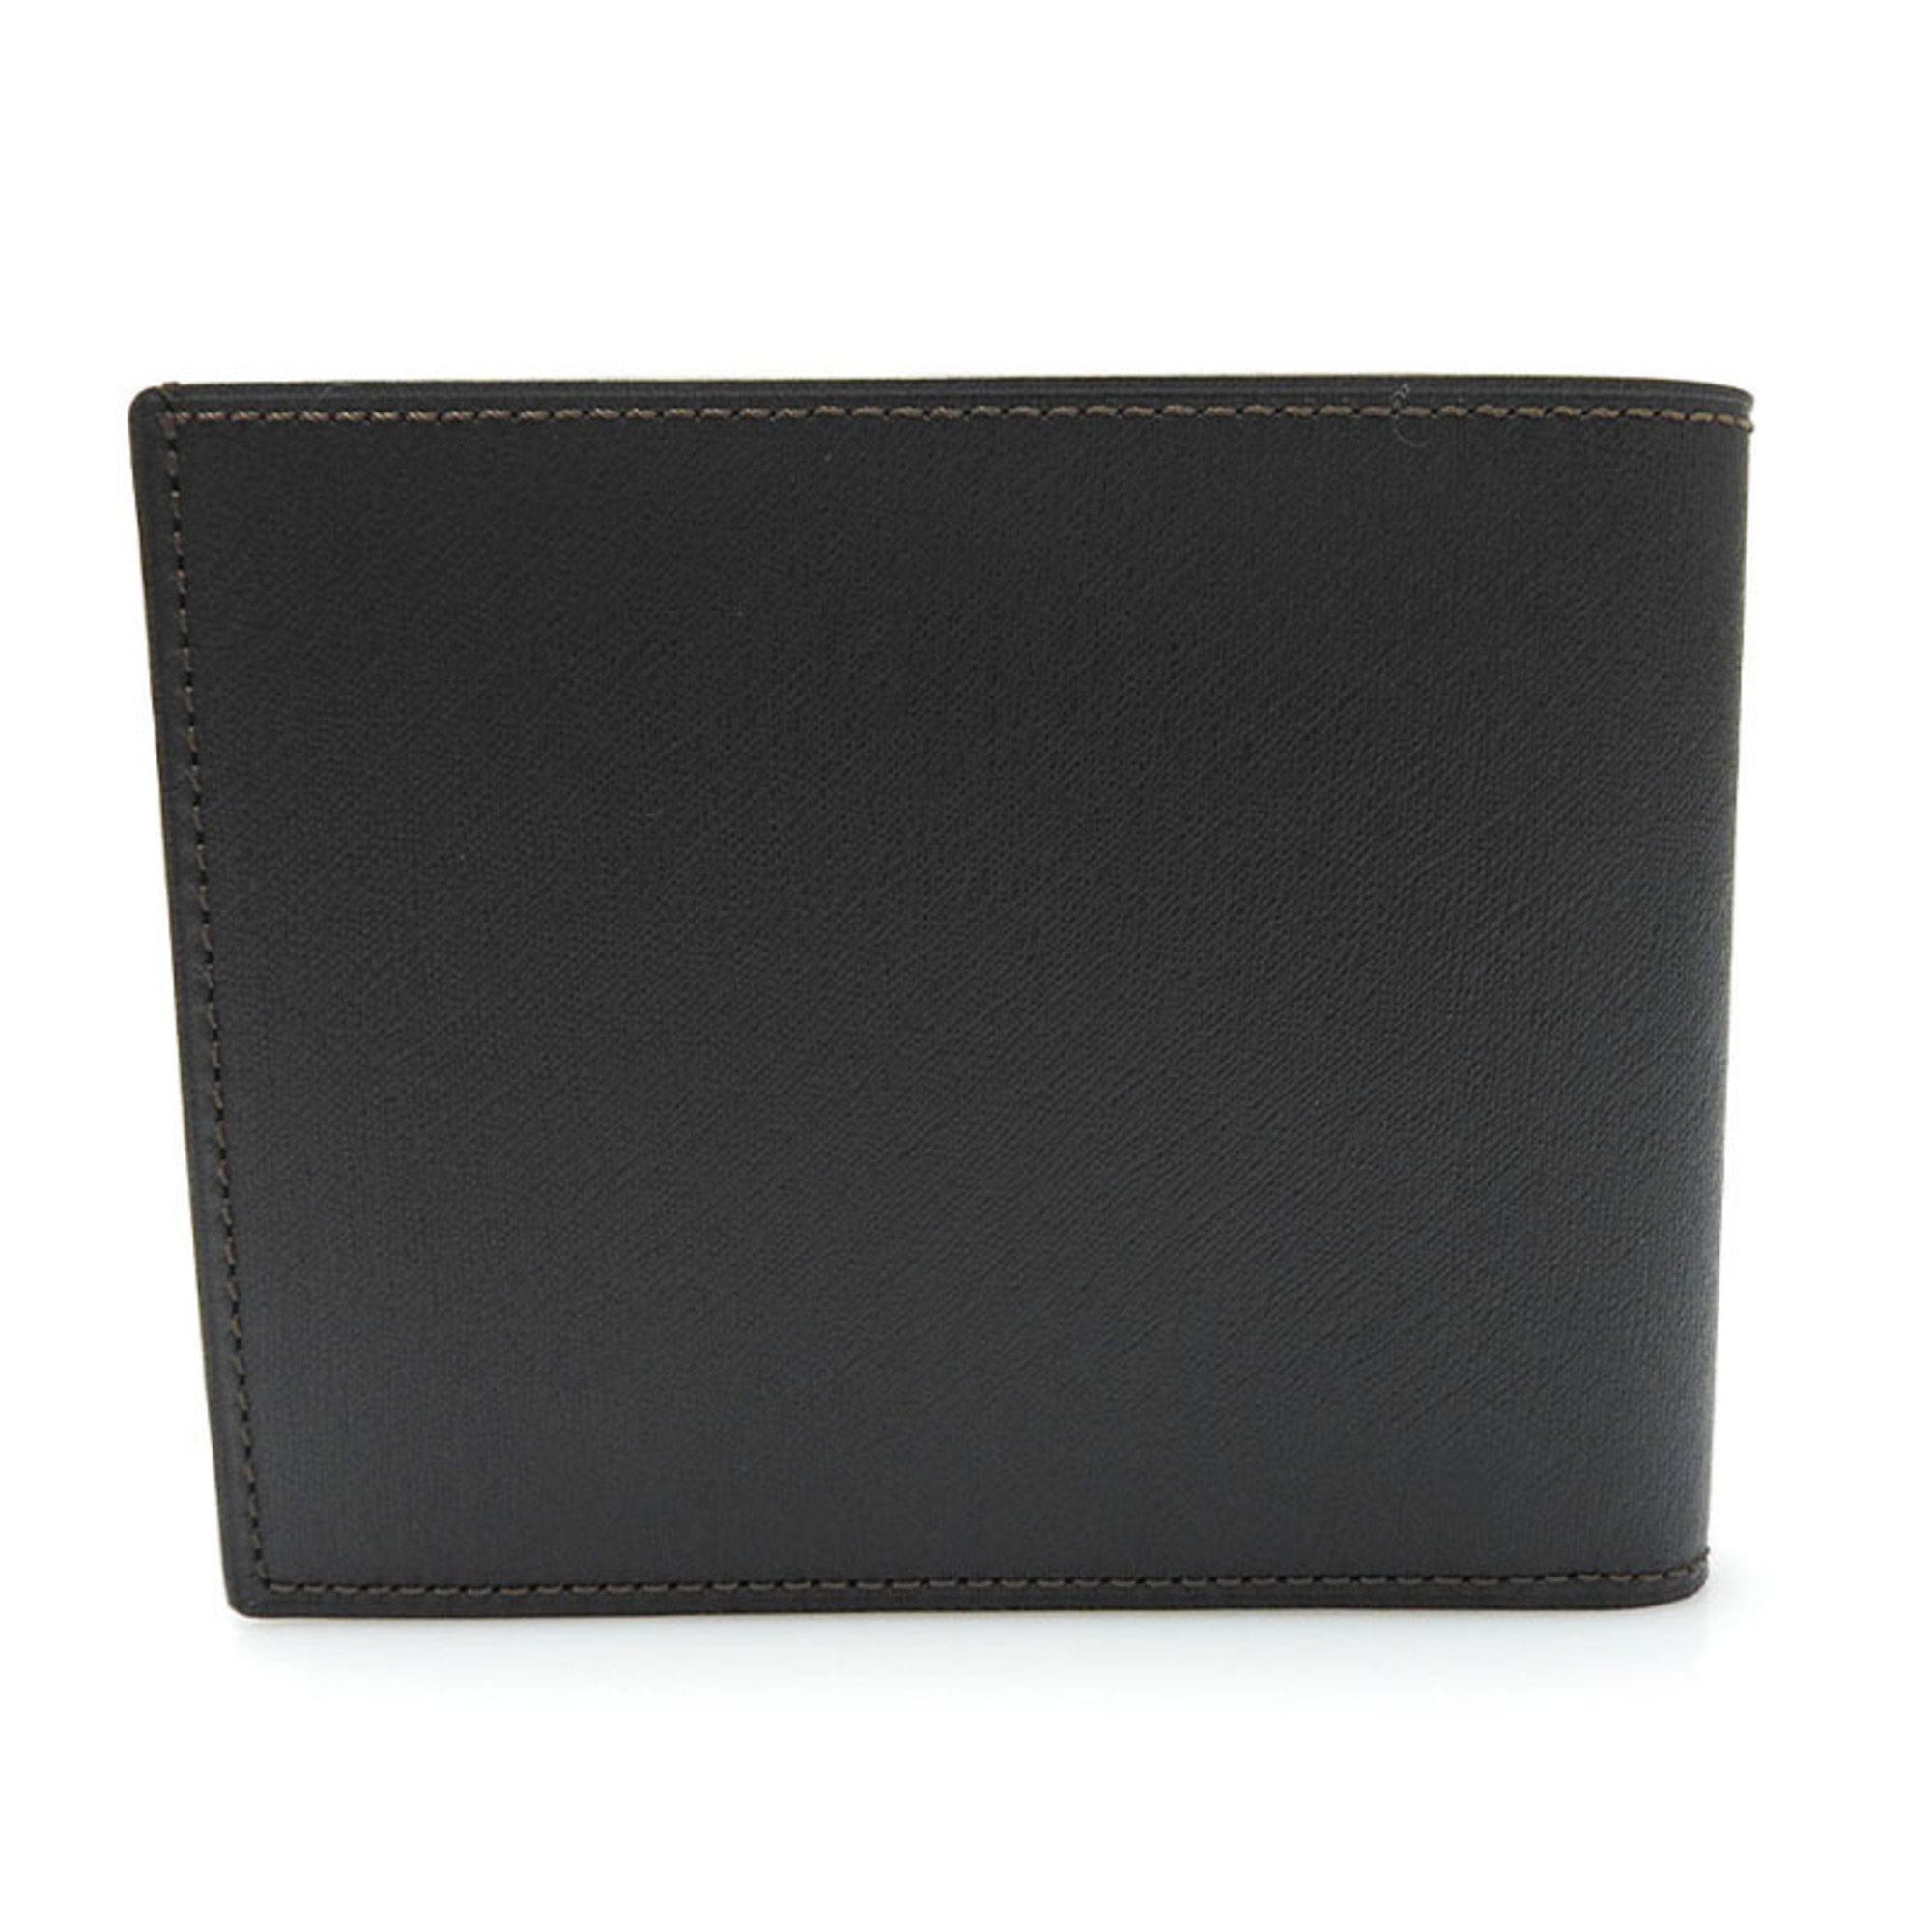 Dunhill DUNHILL Bifold Wallet Leather Dark Brown Men's MENS